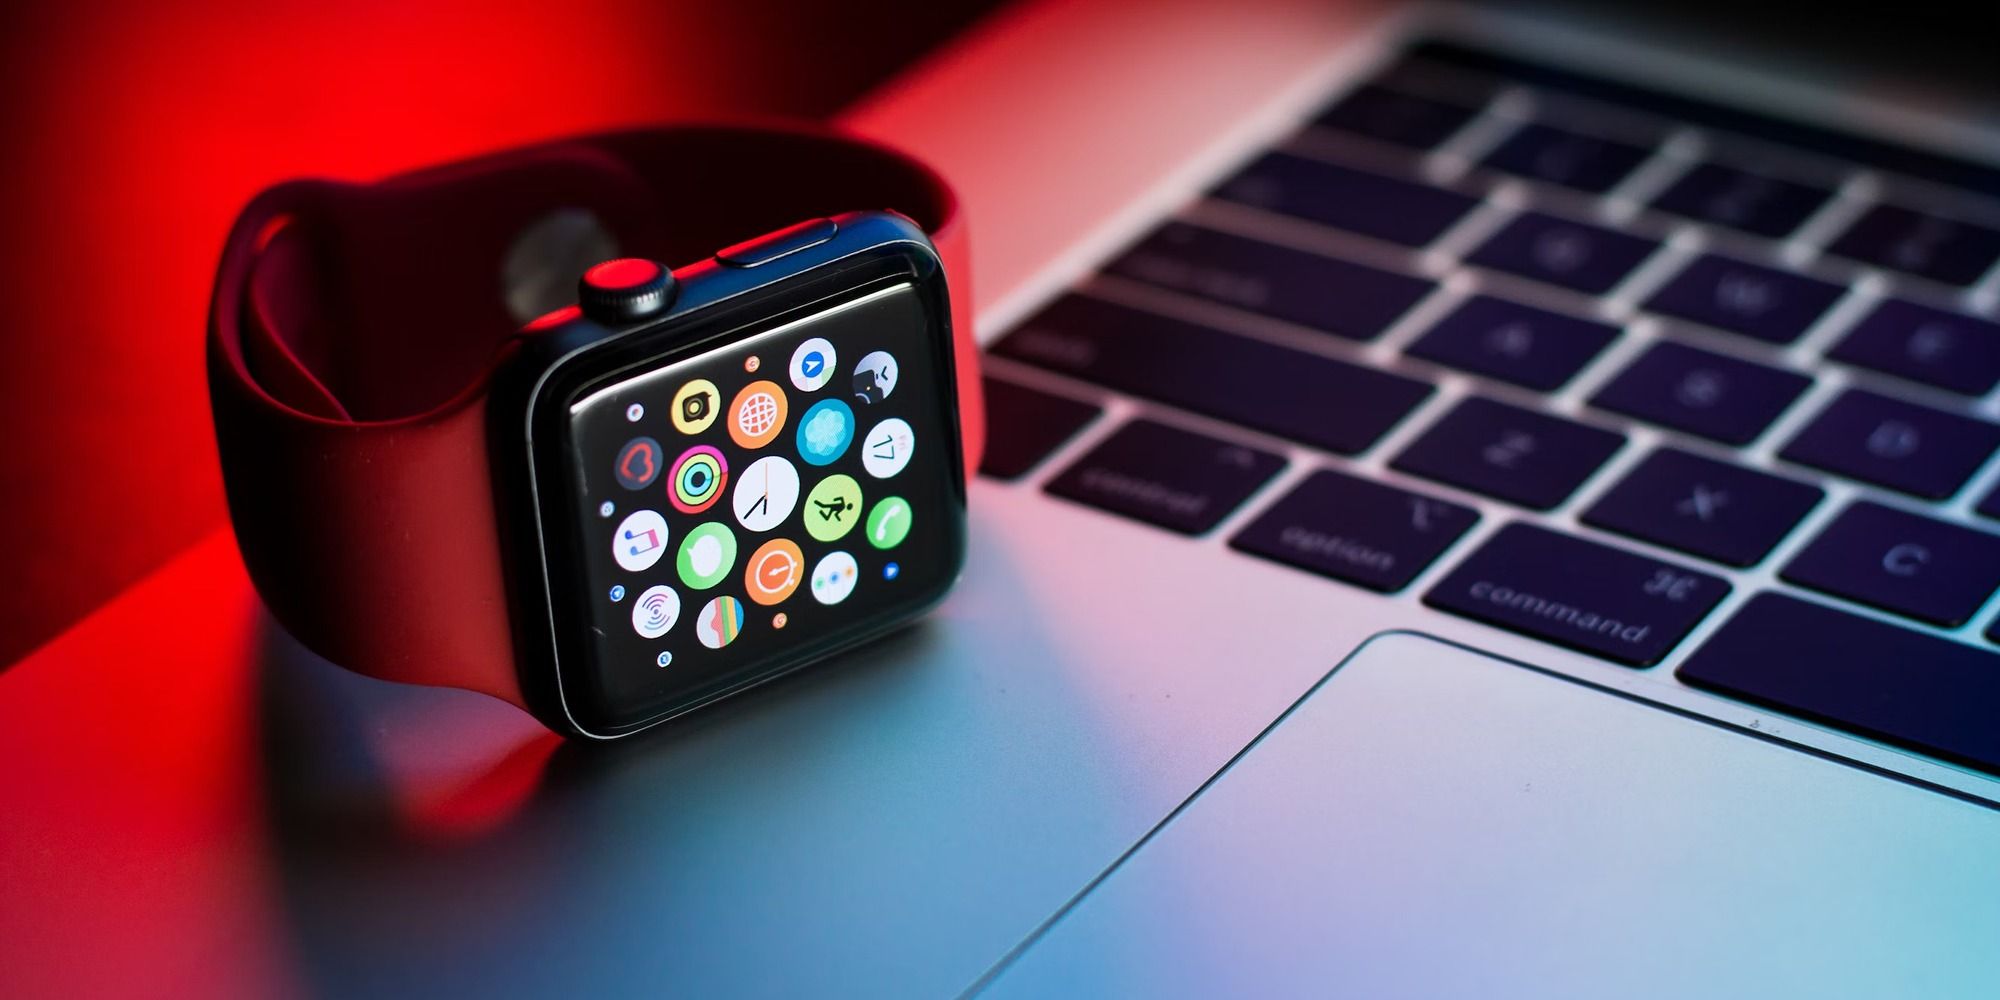 Photo of an Apple Watch on top of an Apple laptop, with a red light in the background creating a mood.